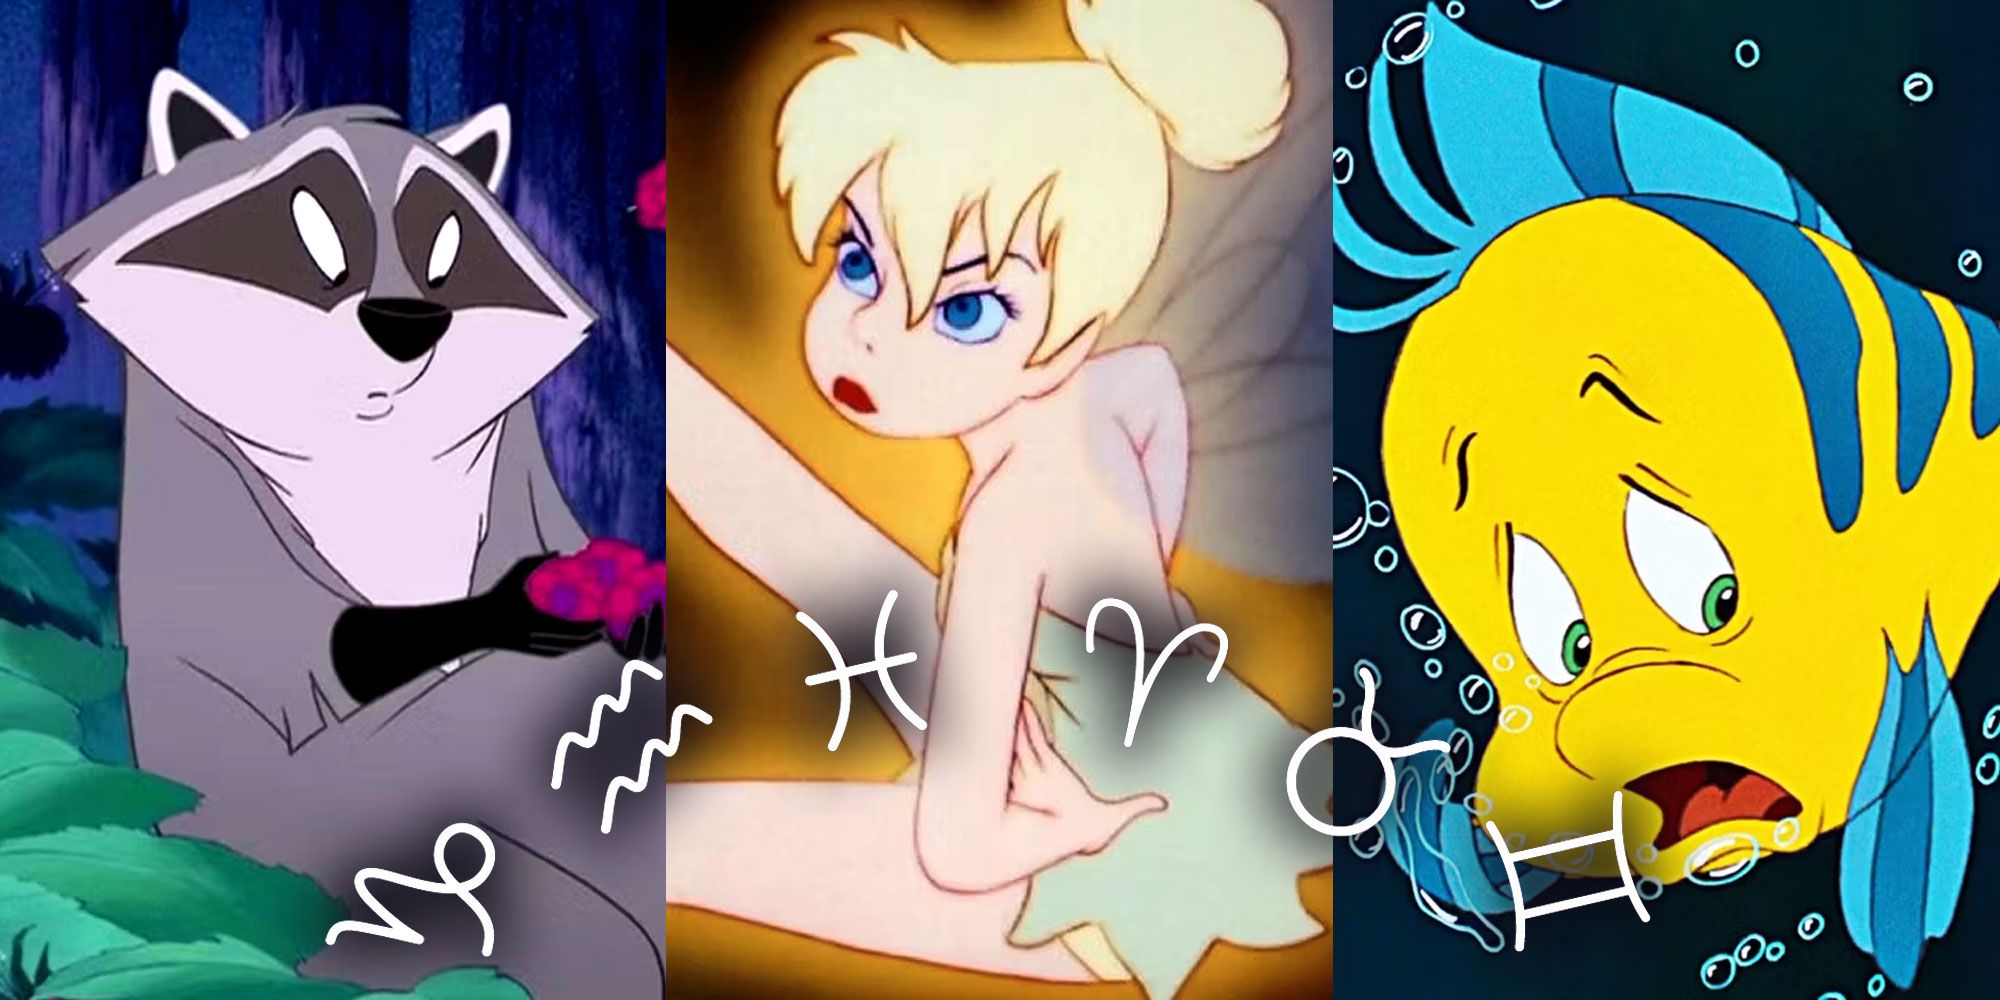 A split image features Meeko from Pocahontas, Tinkerbell from Peter Pan, and Flounder from The Littler Mermaid, with zodiac symbols along the bottom